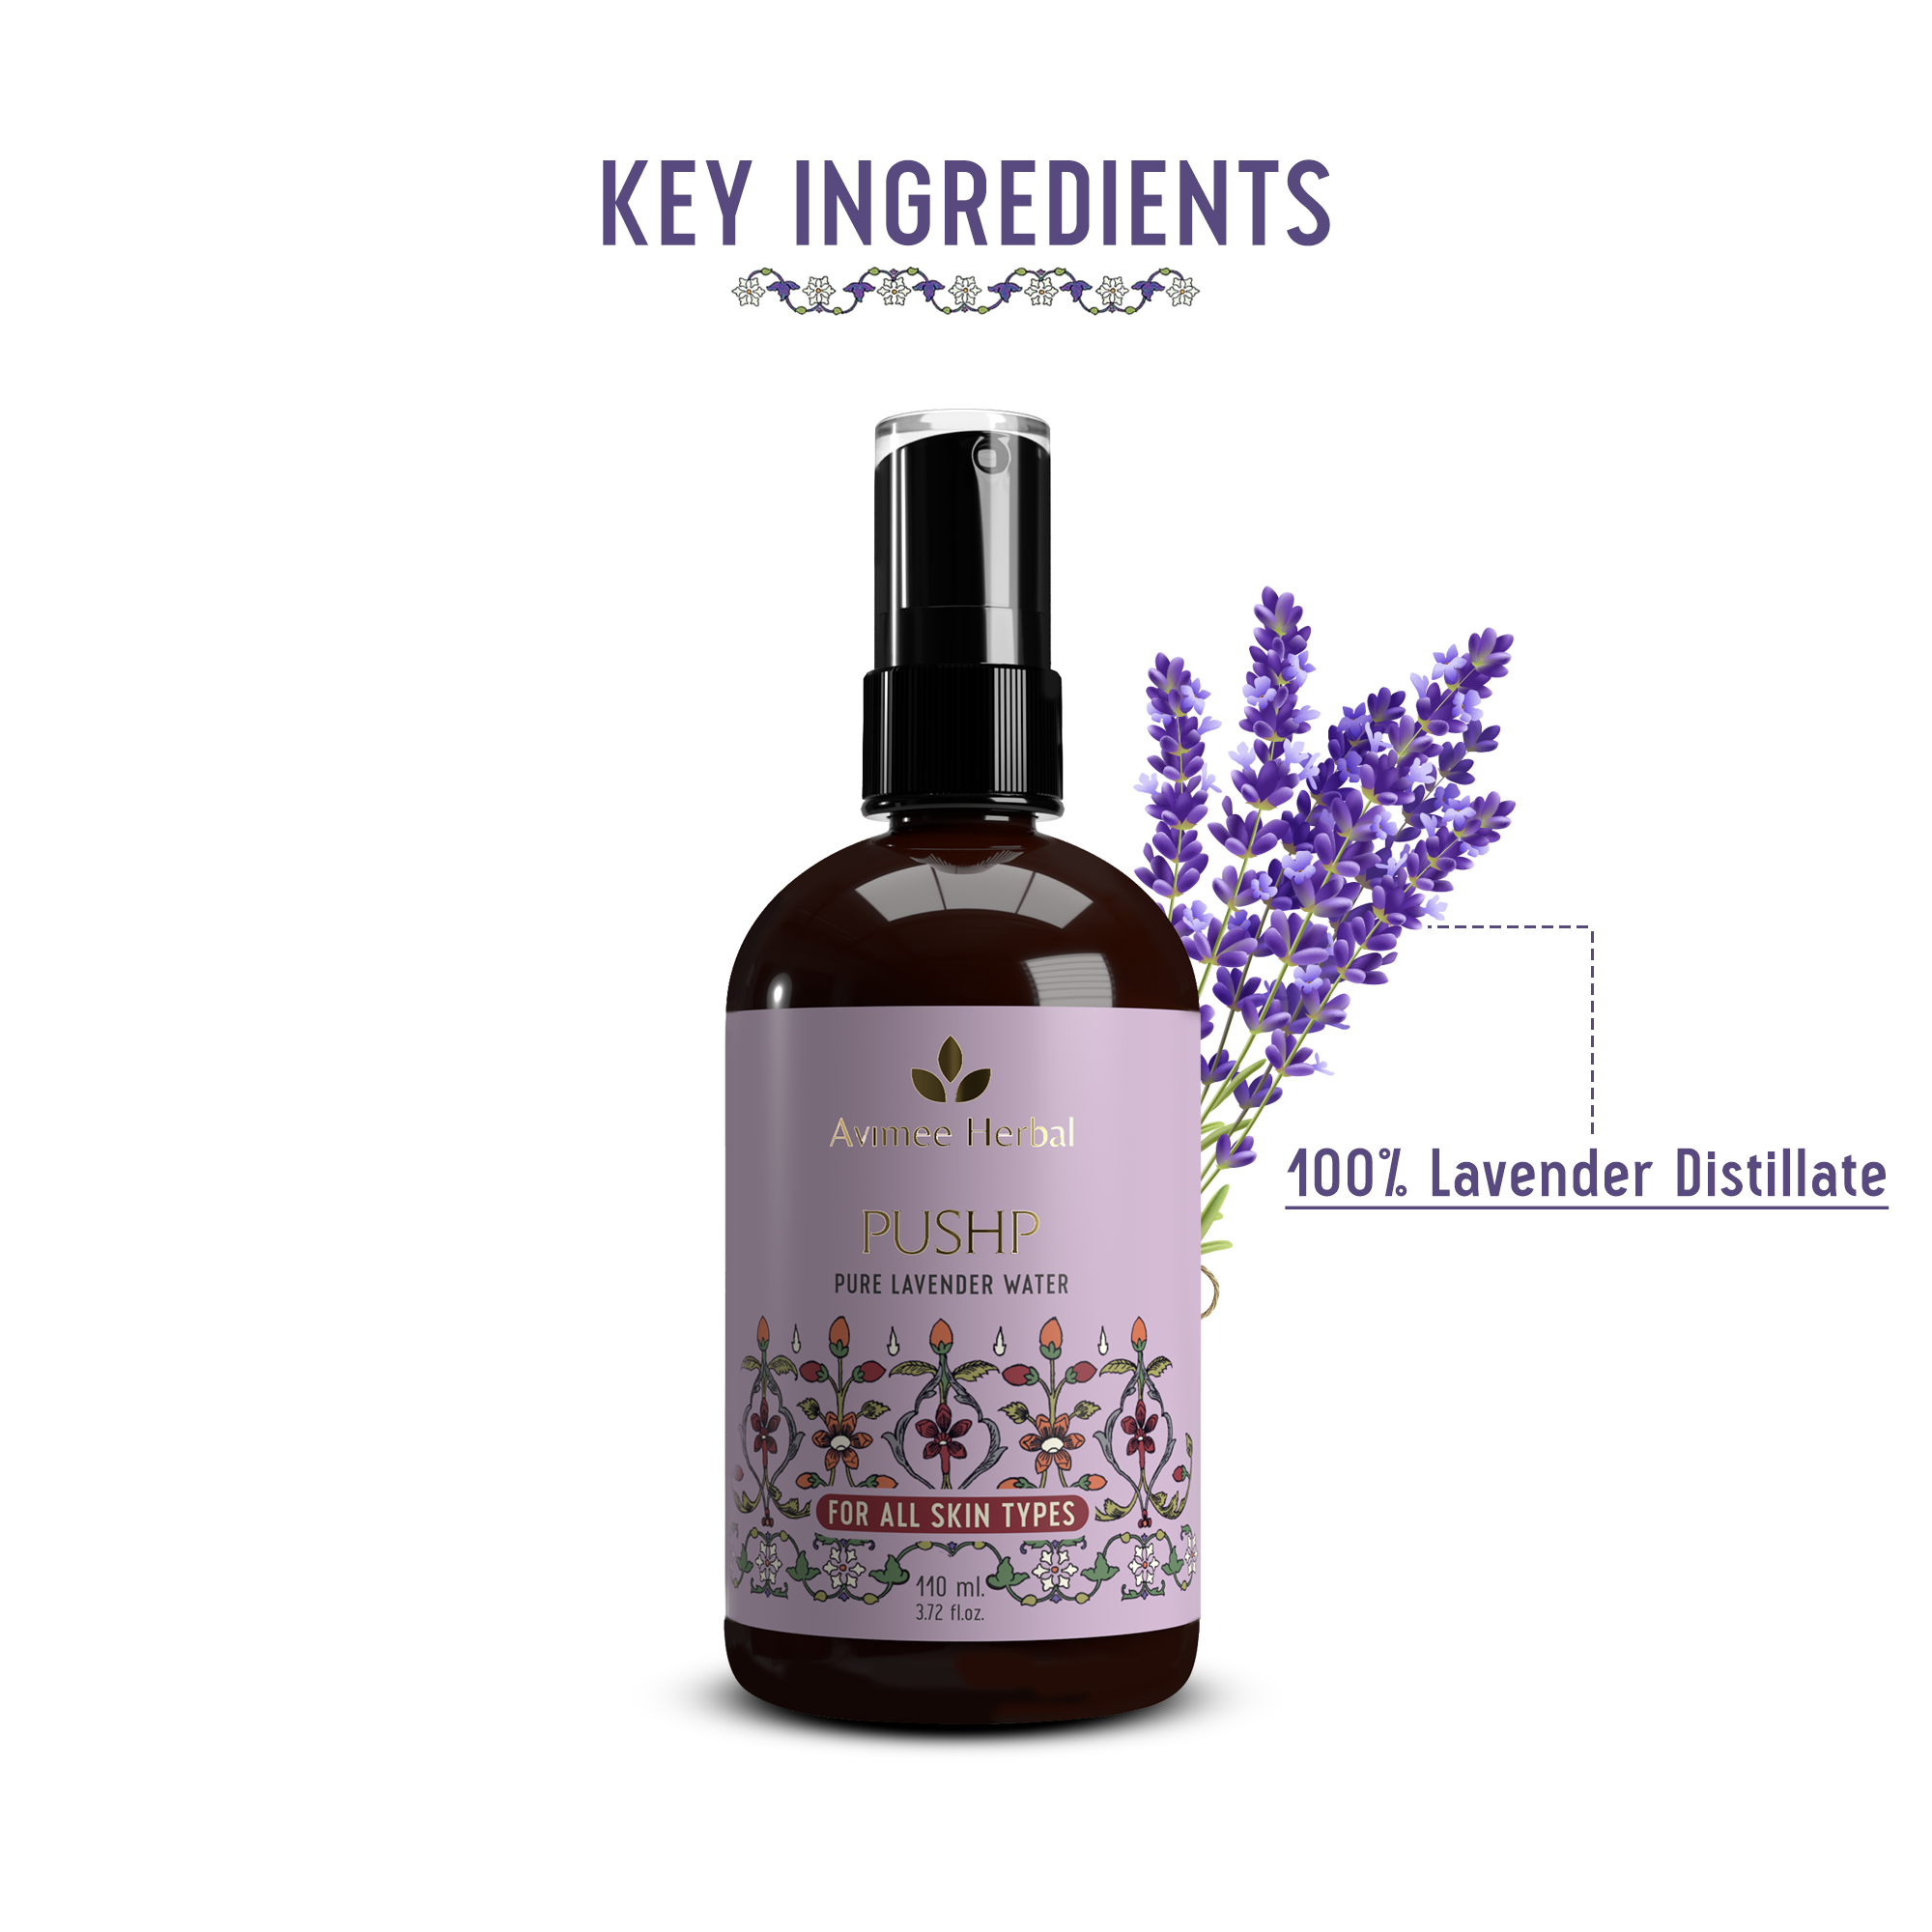 Pushp Pure Lavender Water